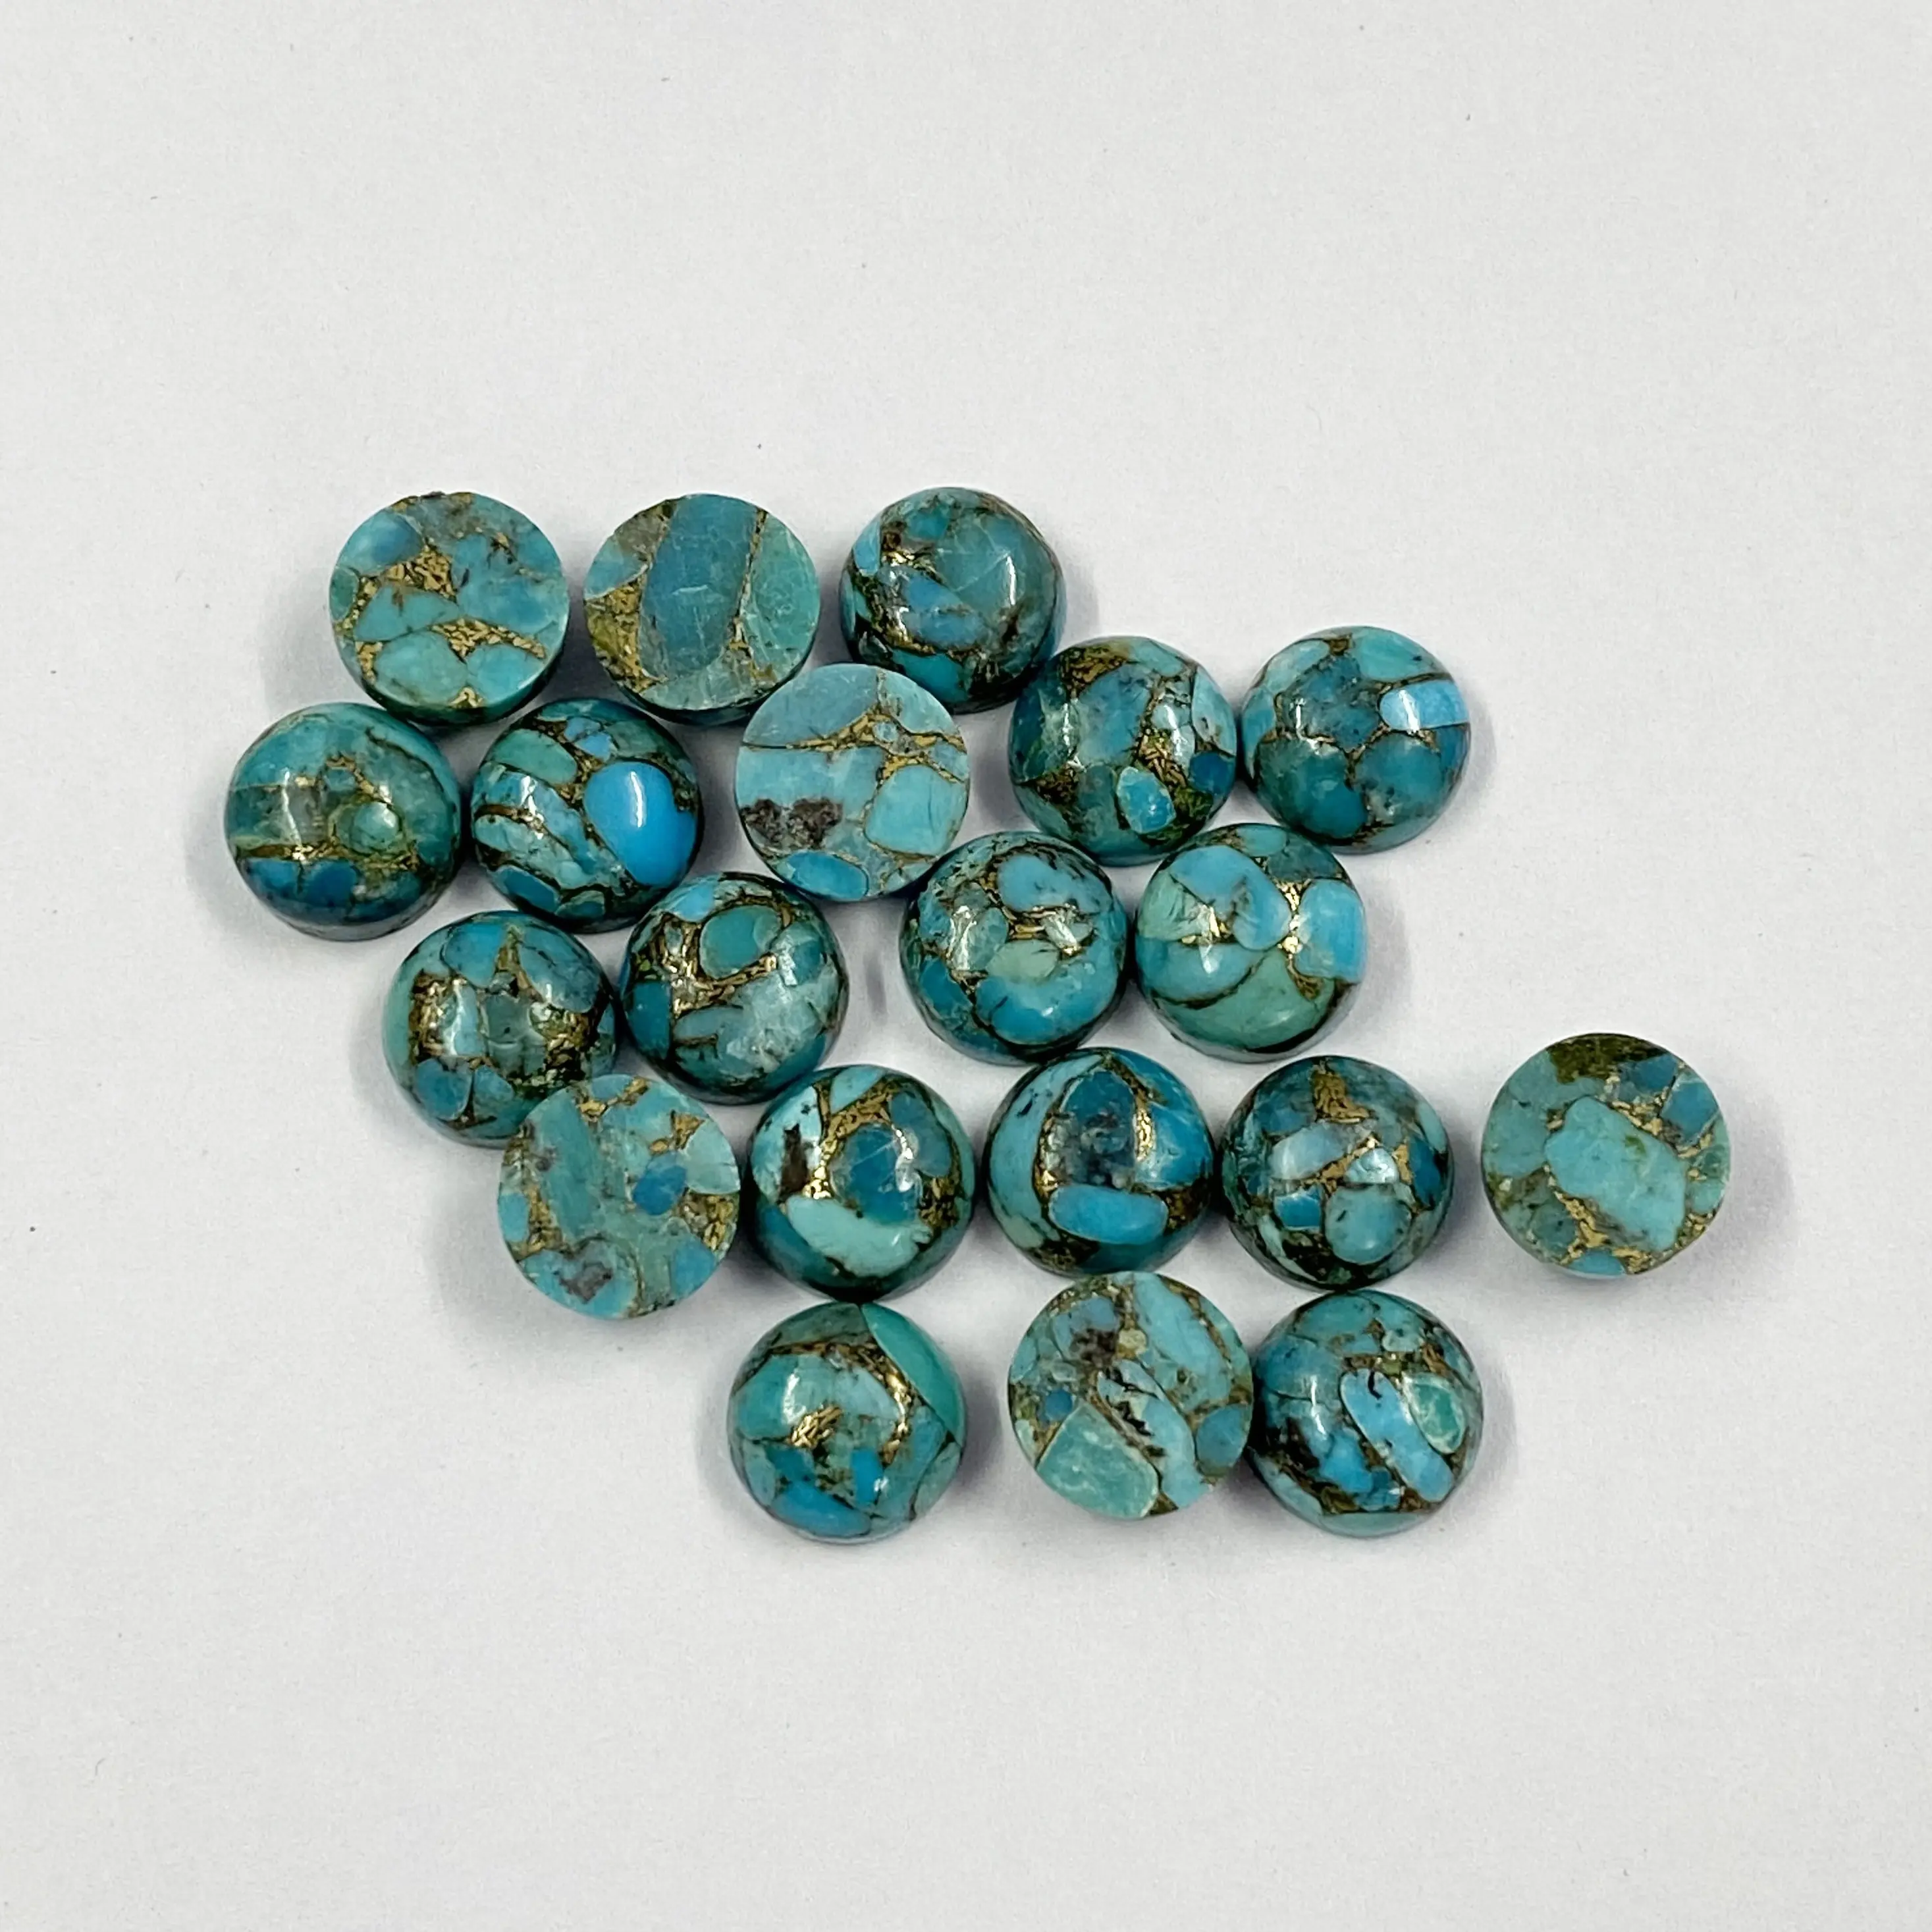 Most Popular Gemstone 2023 Natural 8mm Copper Blue Turquoise Round Certified Healing Cabochons Loose Gemstones From Manufacturer